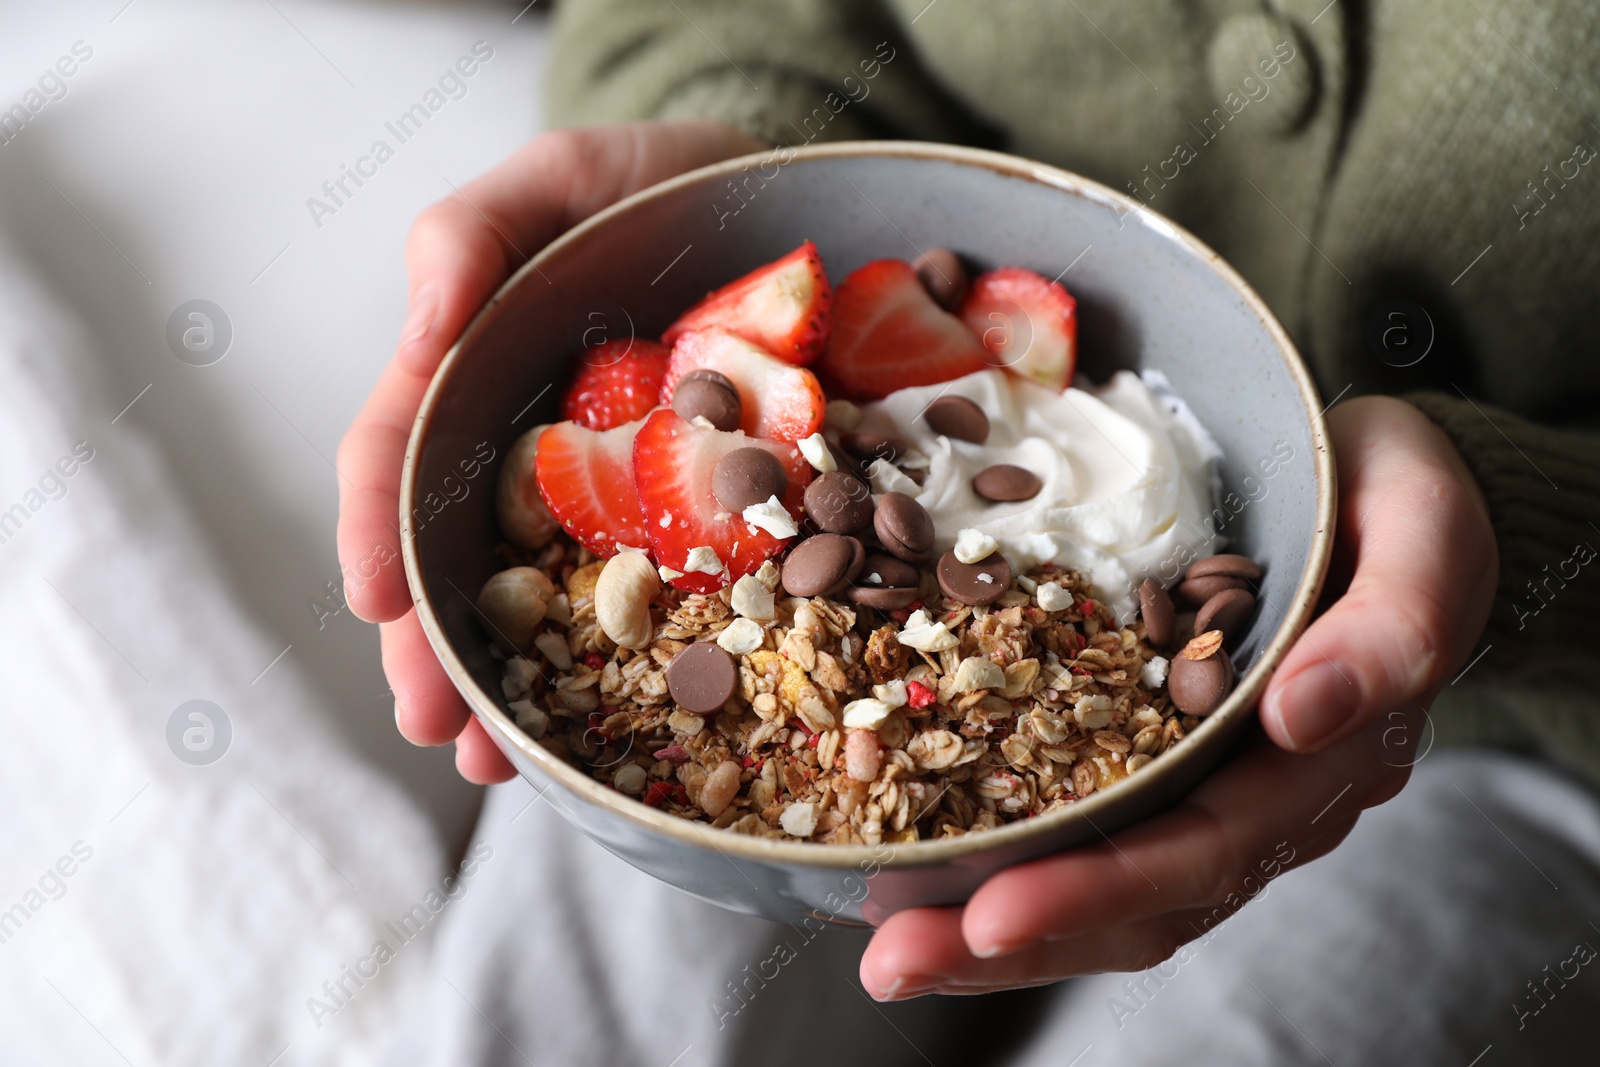 Photo of Woman holding bowl of tasty granola with chocolate chips, strawberries and yogurt indoors, closeup